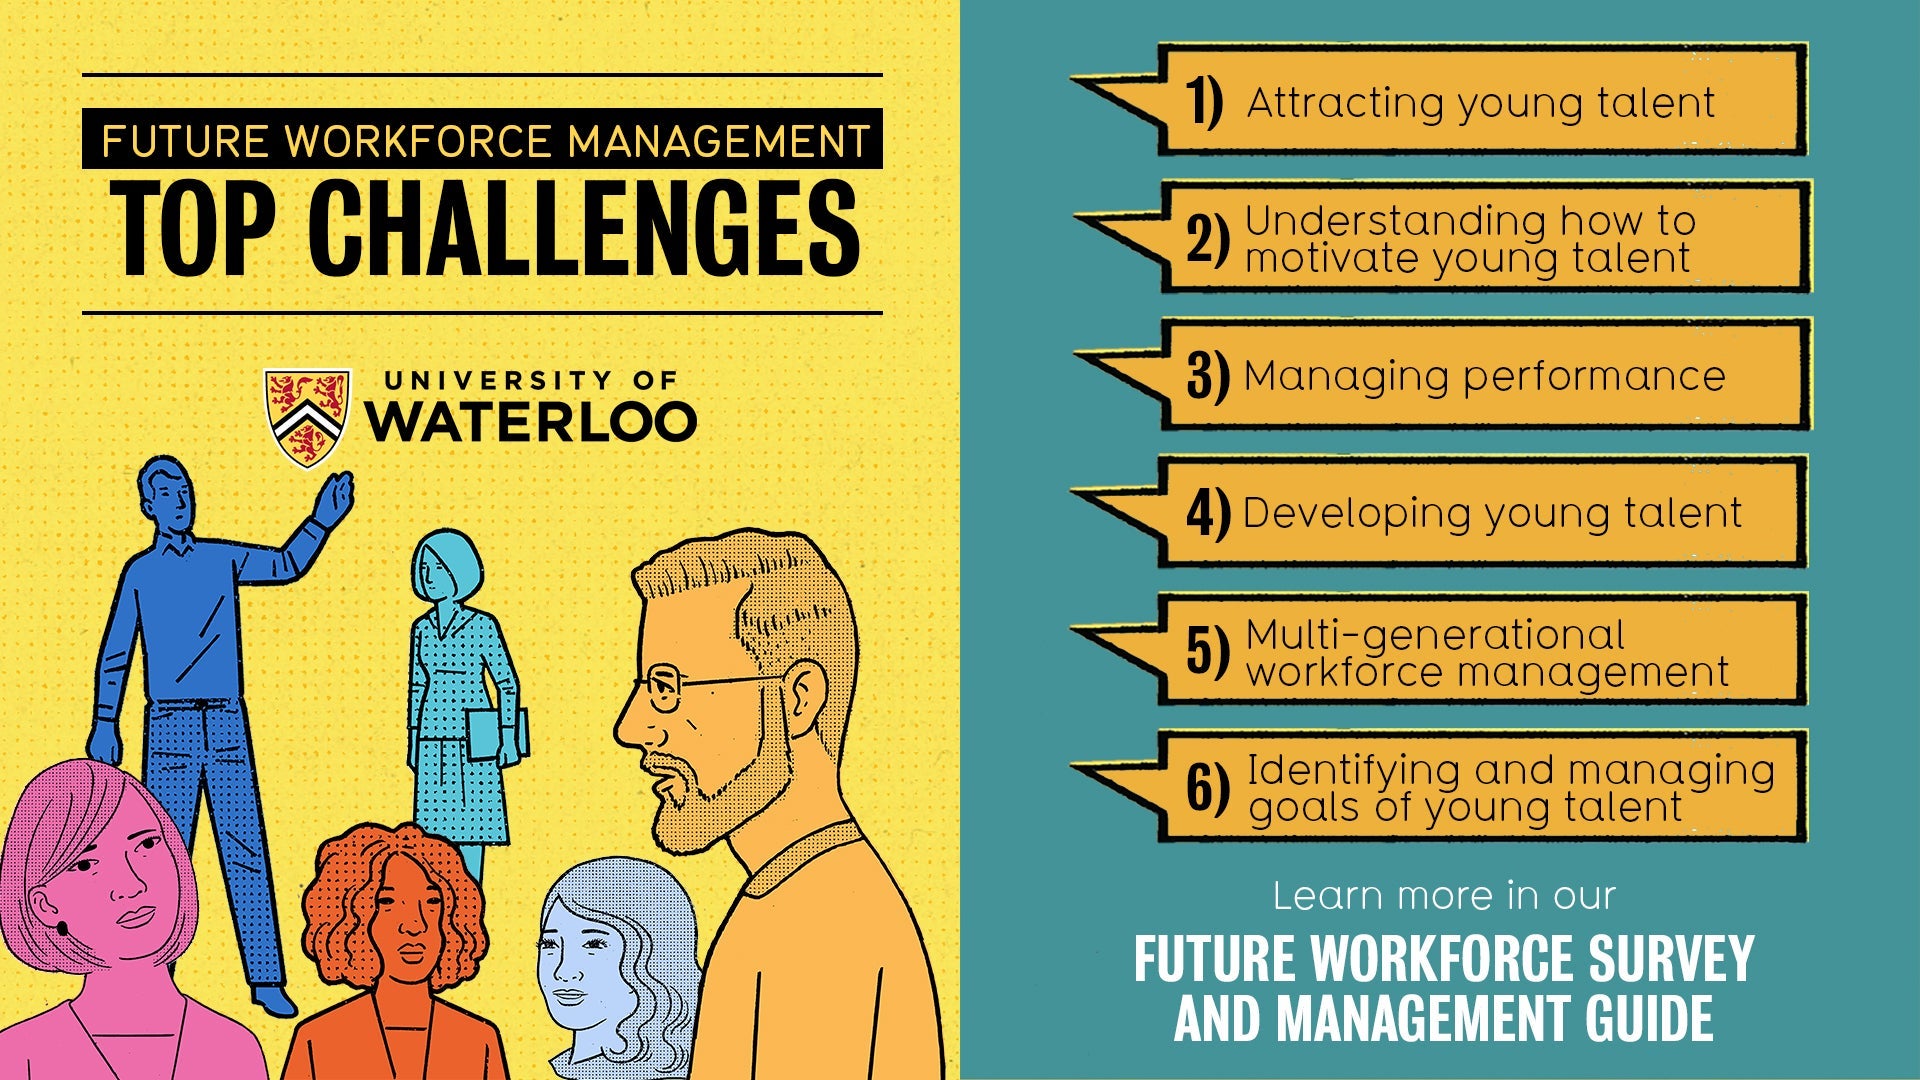 Graphic outlining the top 6 challenges employers experience when recruiting and retaining young talent. 1. Attracting young talent. 2. Understanding how to motivate young talent. 3. Managing performance. 4. Developing young talent. 5. Multi-generational workforce management. 6. Indentifying and managing goals of young talent.